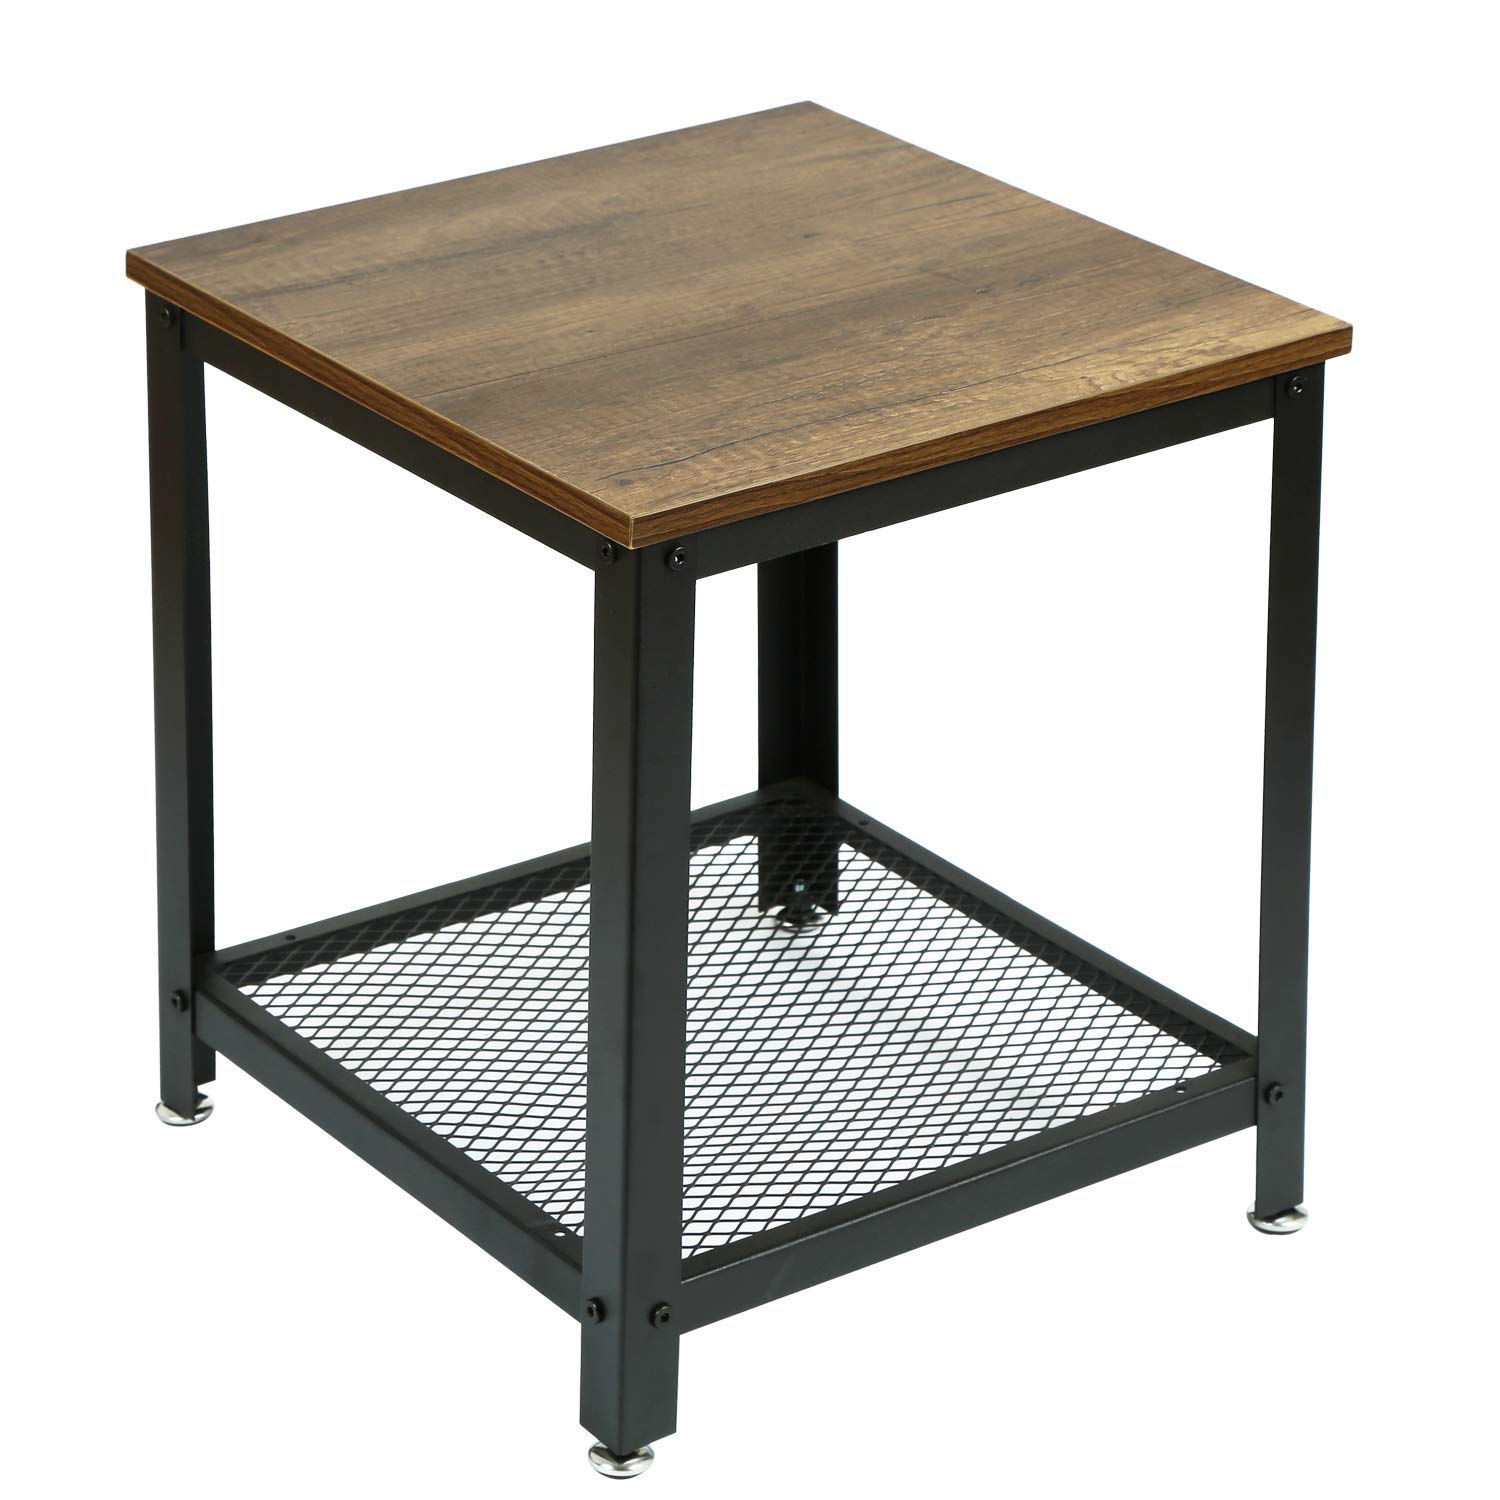 asense side table tier with storage shelf unique accent end tables wooden top sturdy metal frame height inches kitchen dining natural wood coffee media stand couches folding